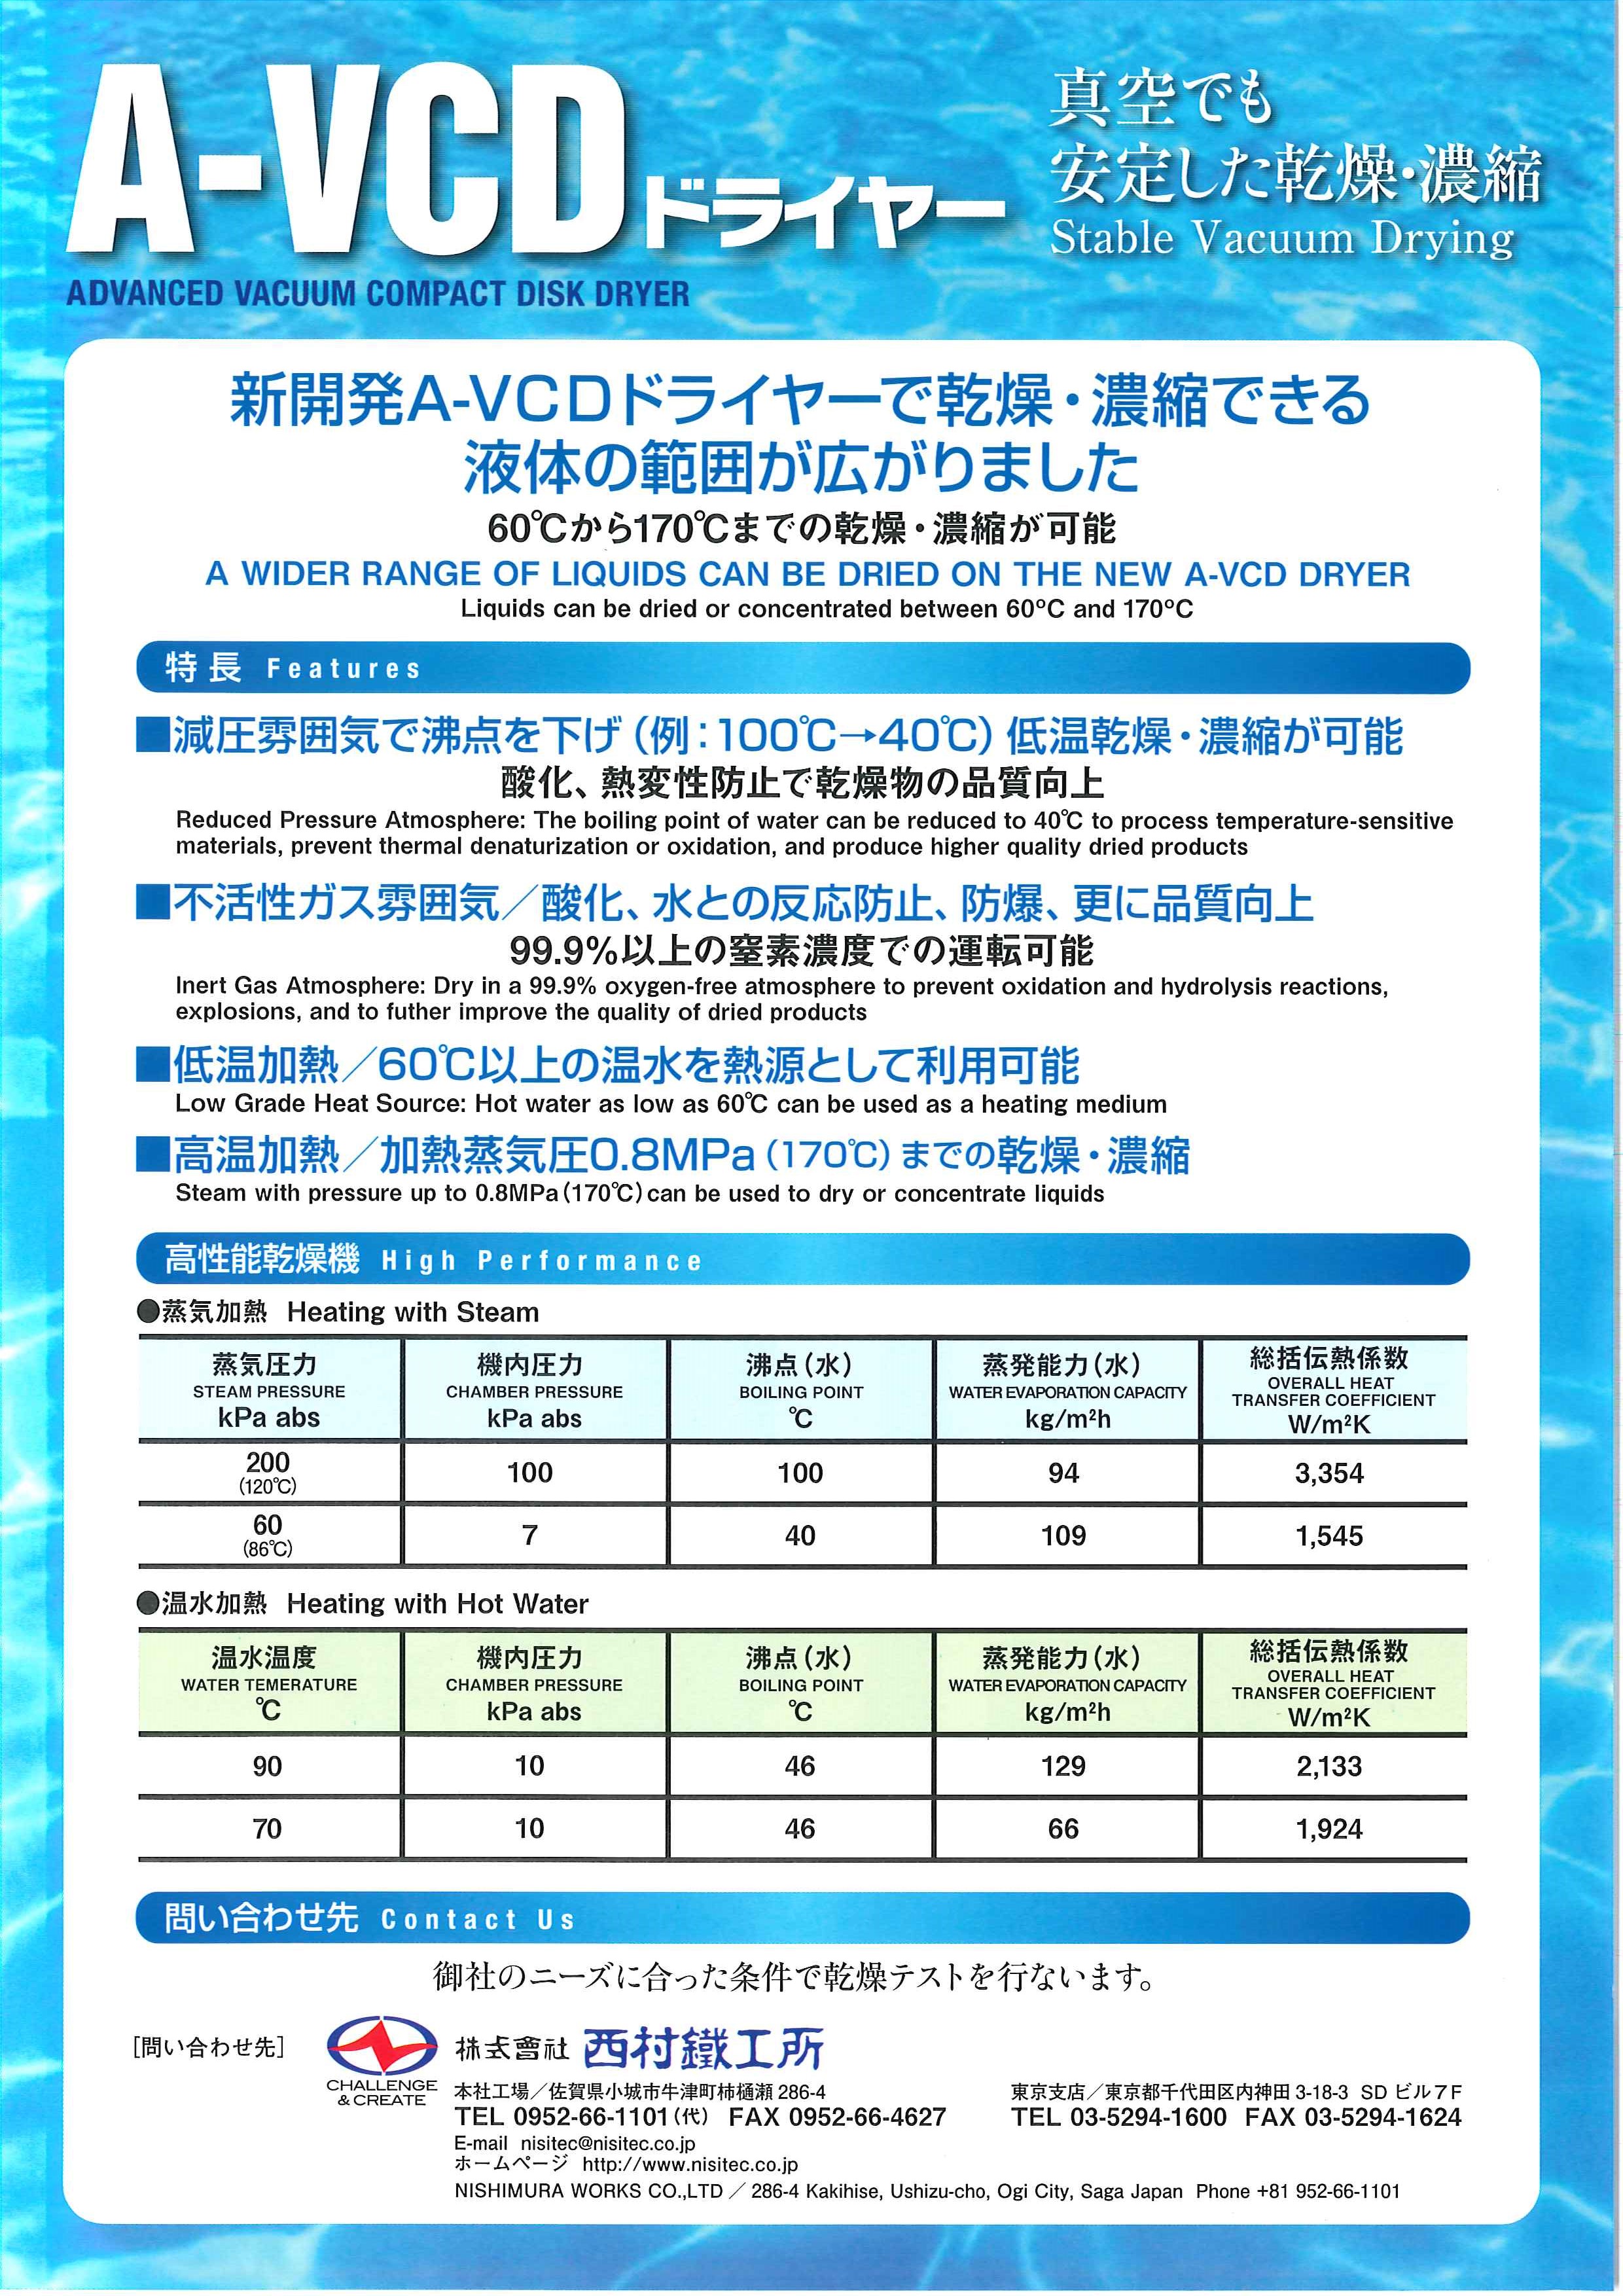 More Information about the A-VCD Dryer